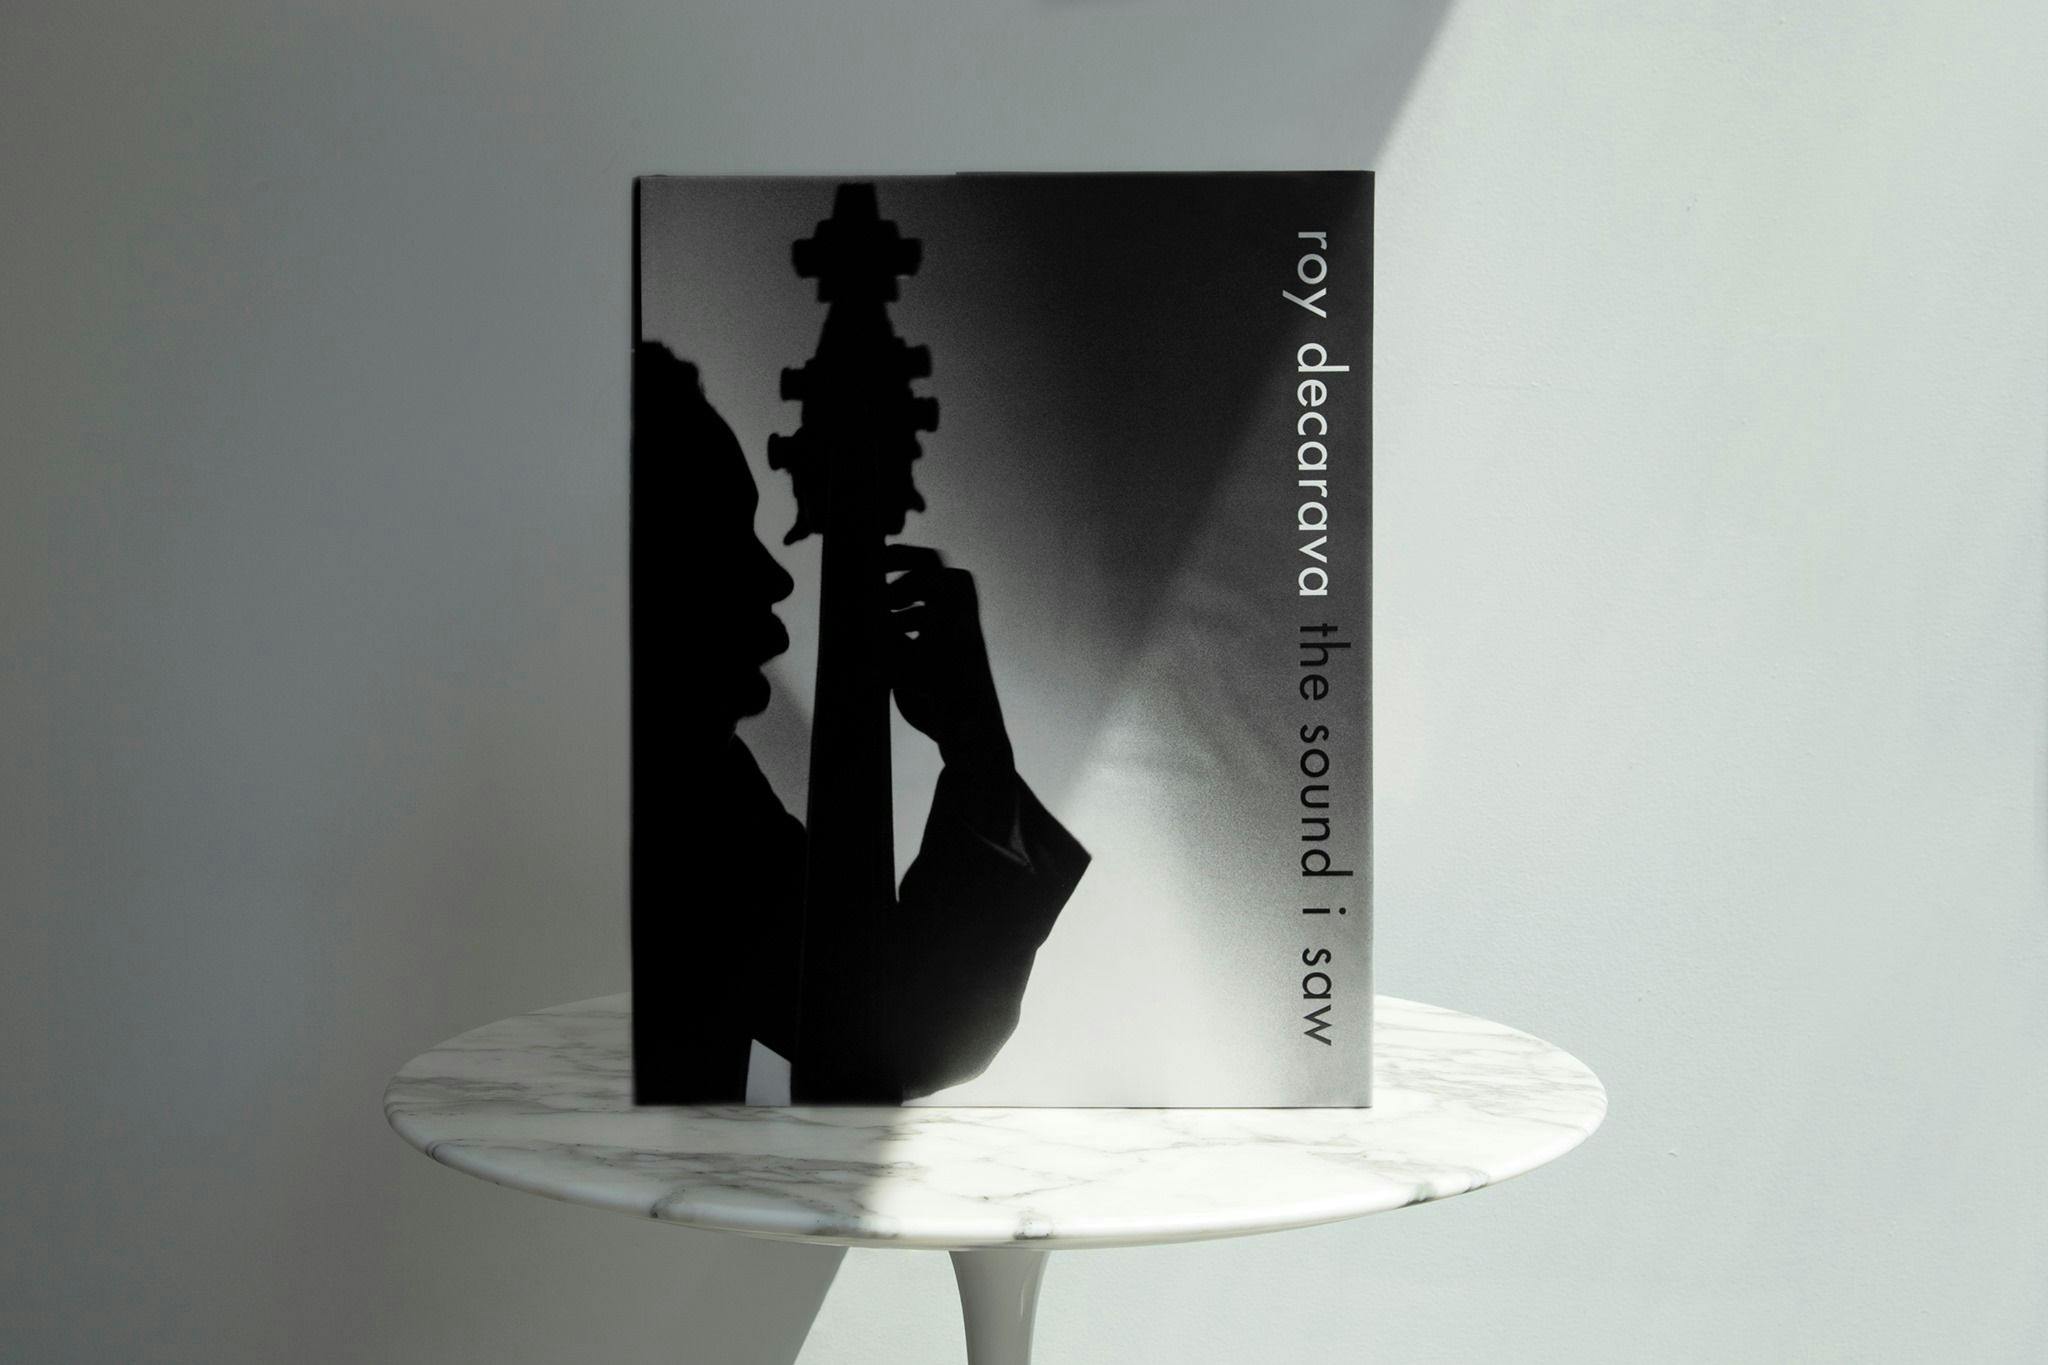 Cover of a book titled Roy DeCarava: The Sound I Saw, published by David Zwirner Books in 2019.